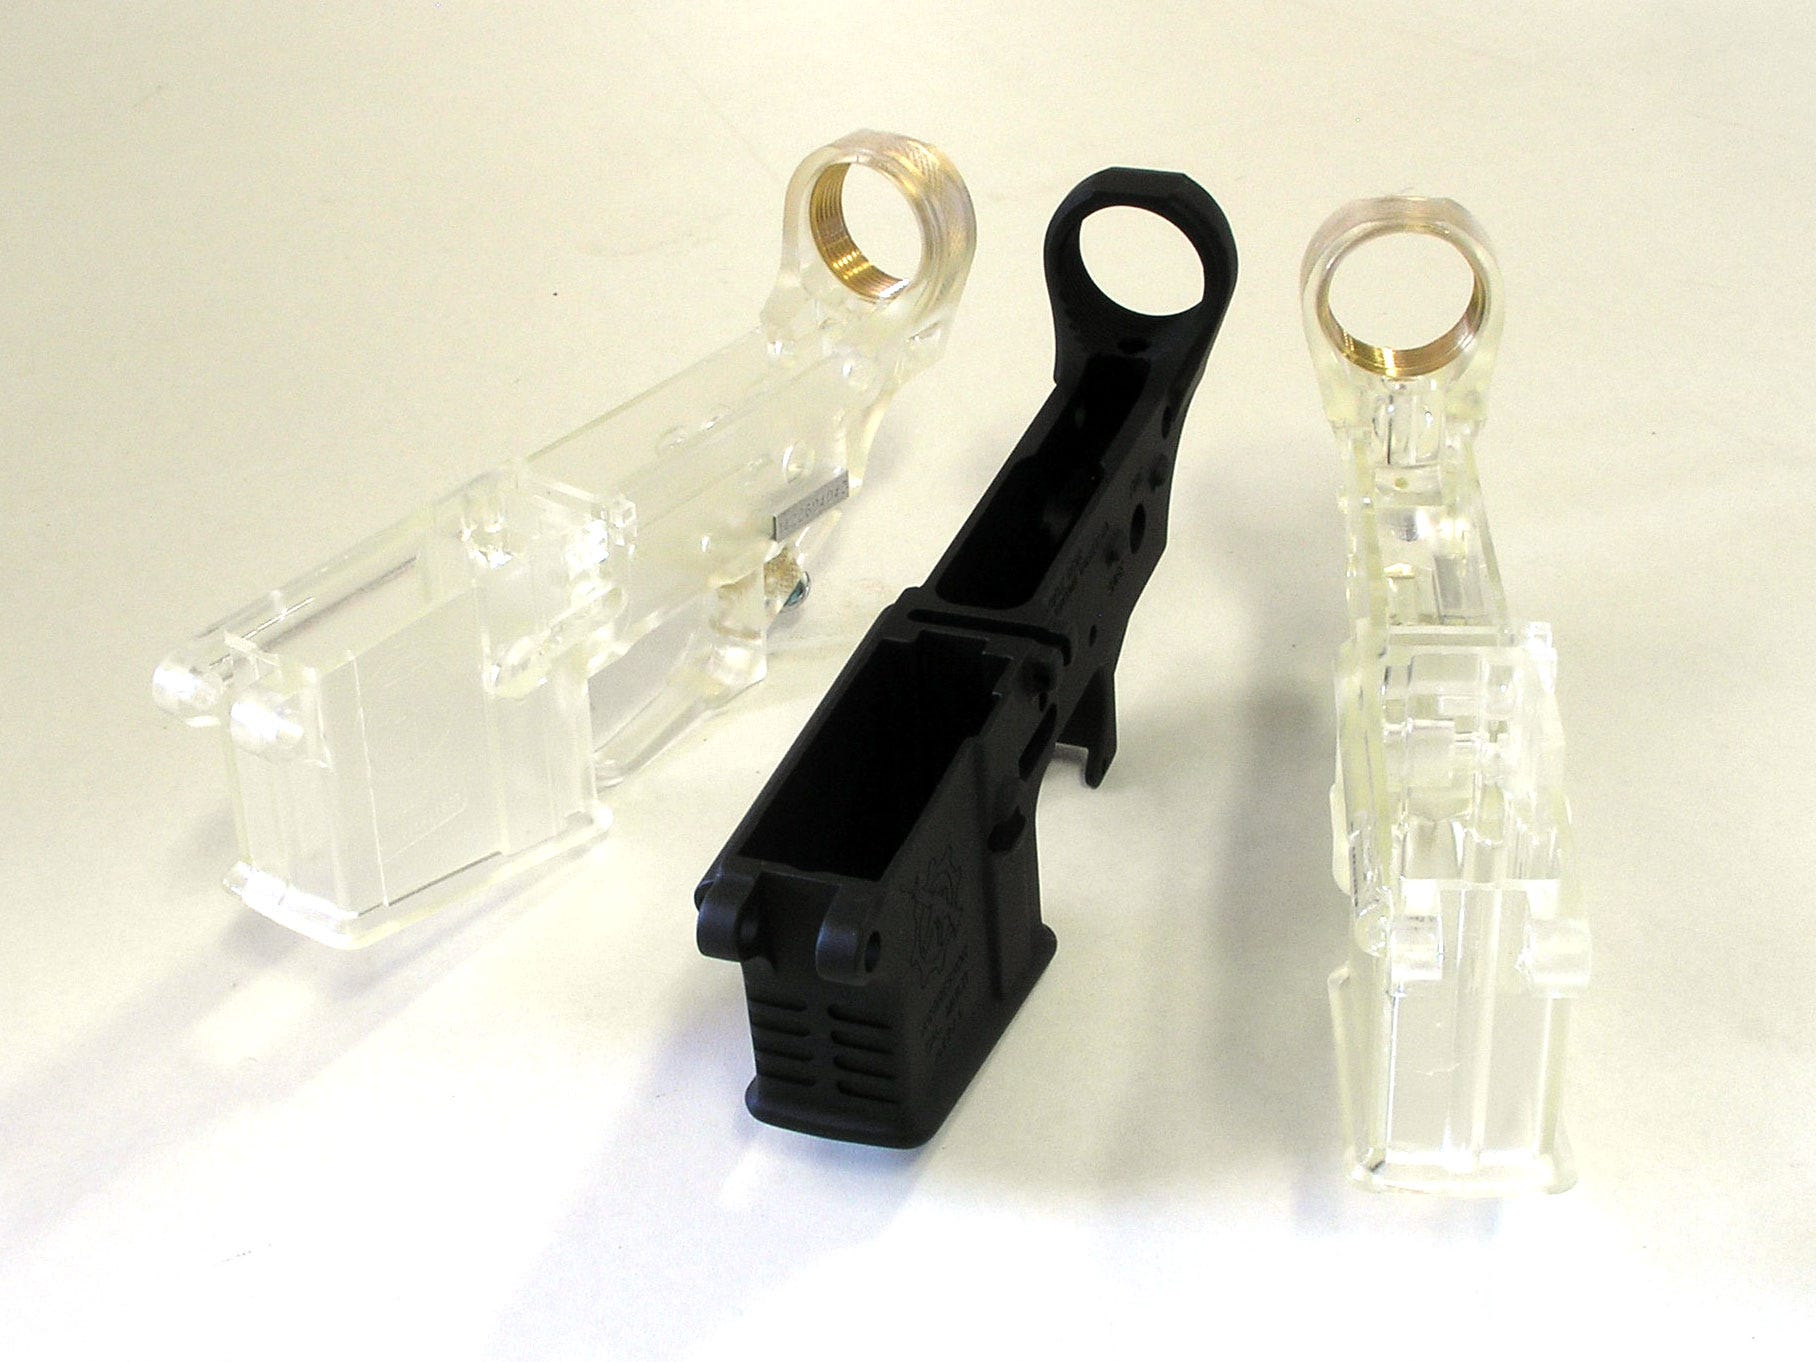 How 3D Printed Guns Will Rewrite Our Laws